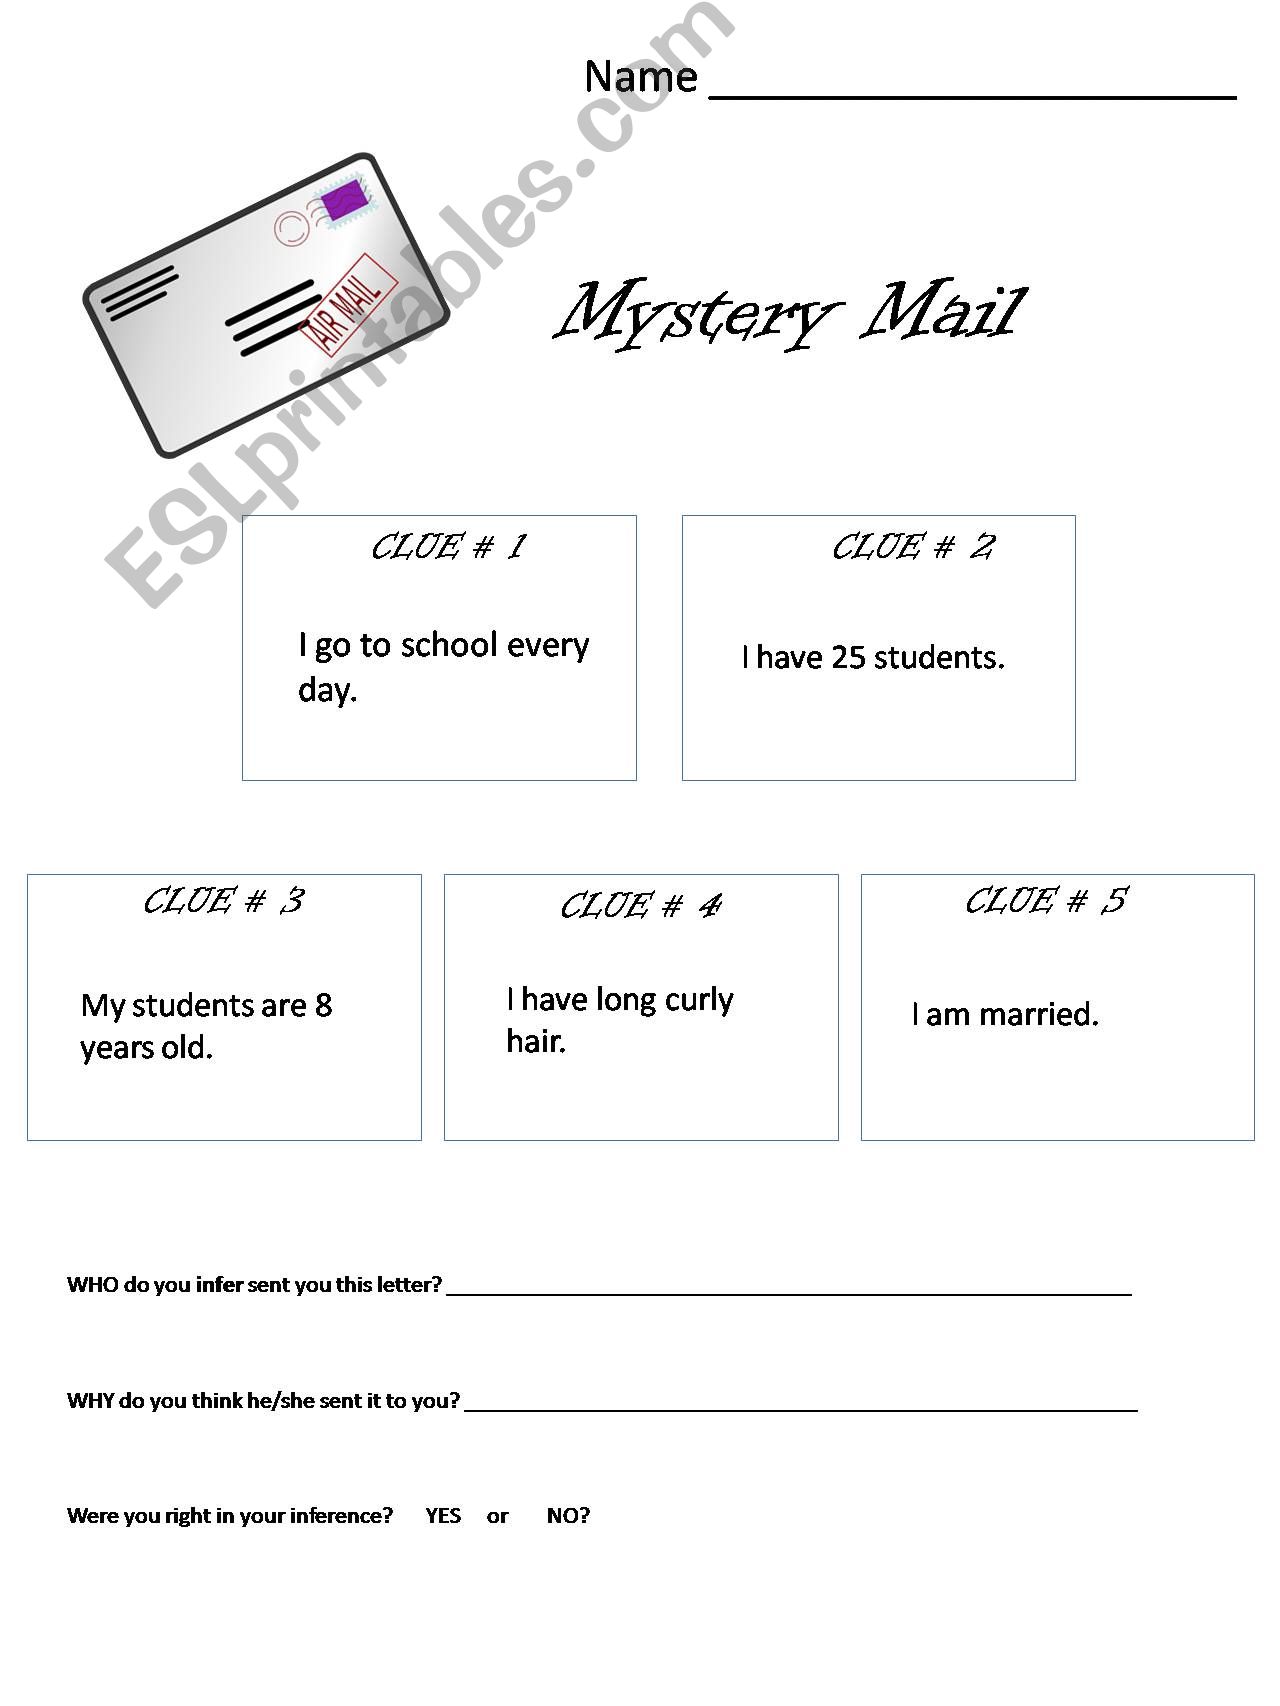 Mystery Mail 2 powerpoint